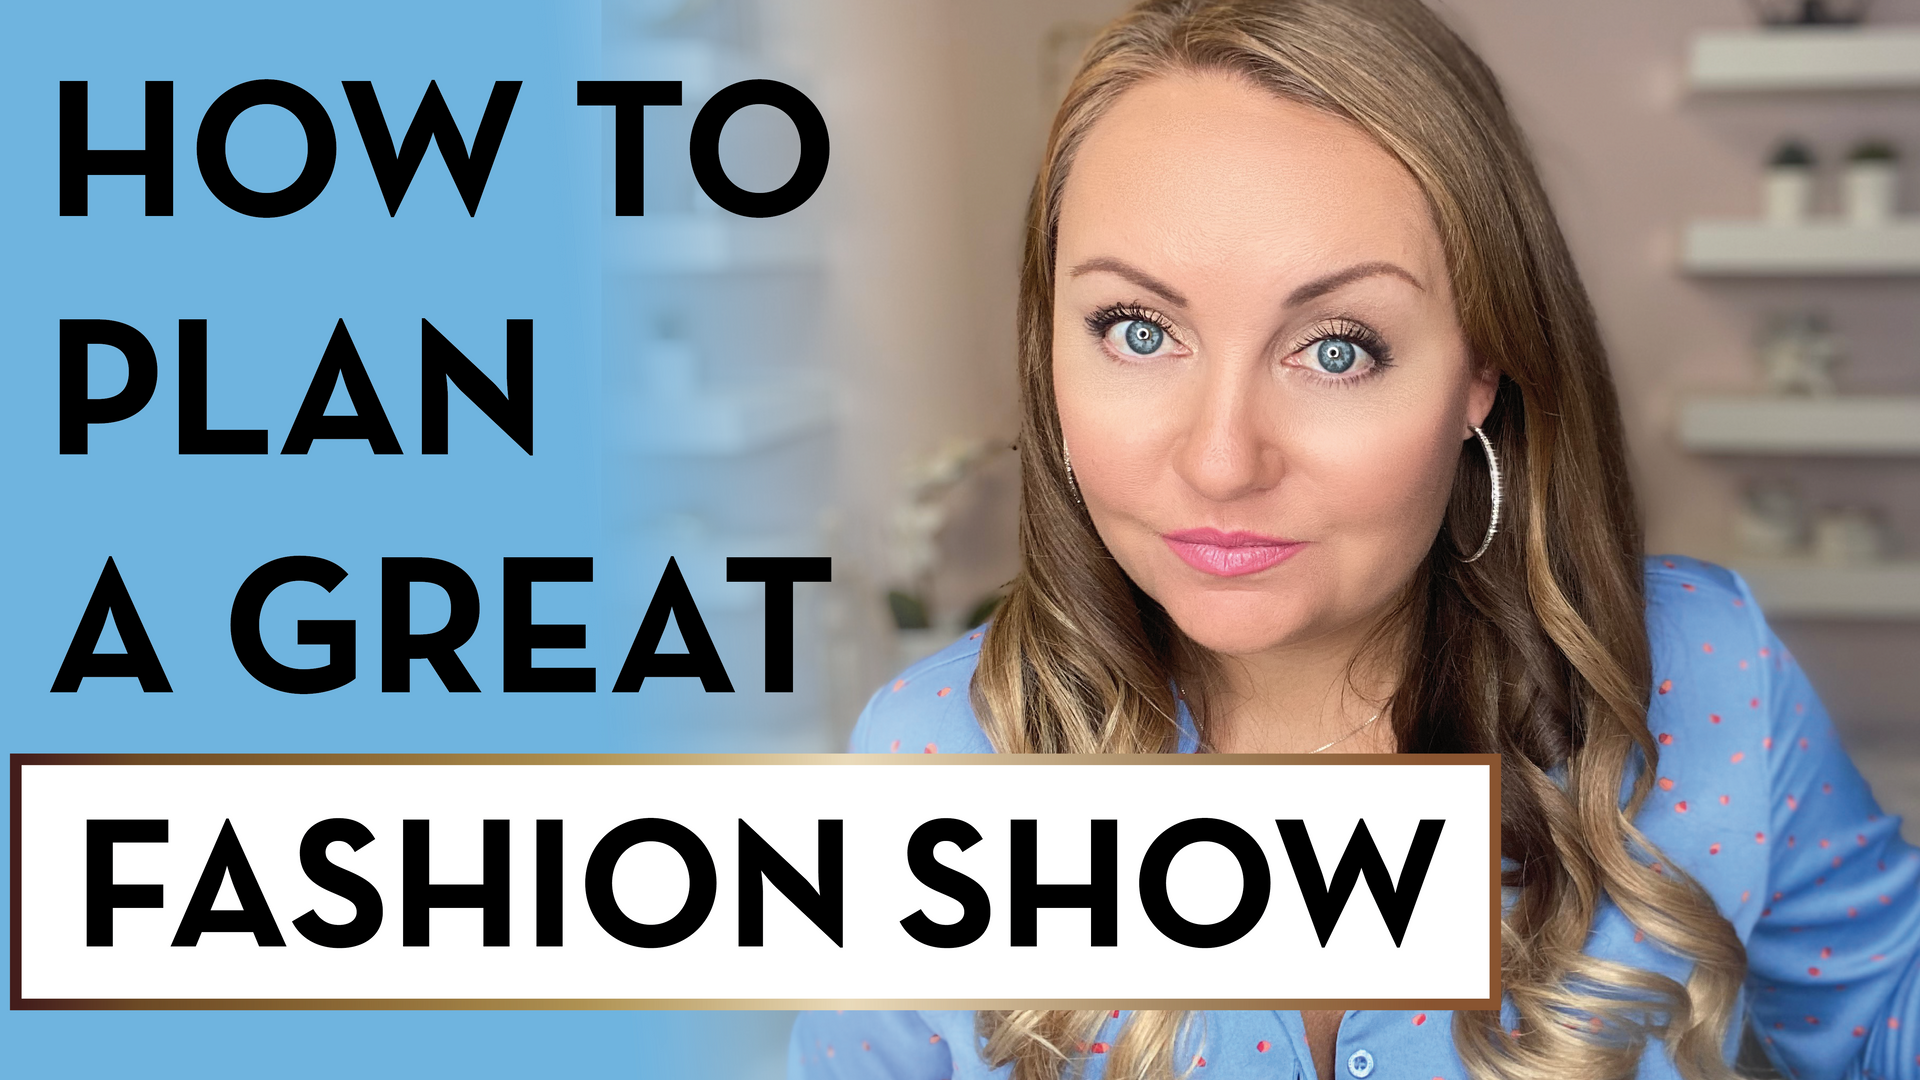 Load video: How to plan a fashion show